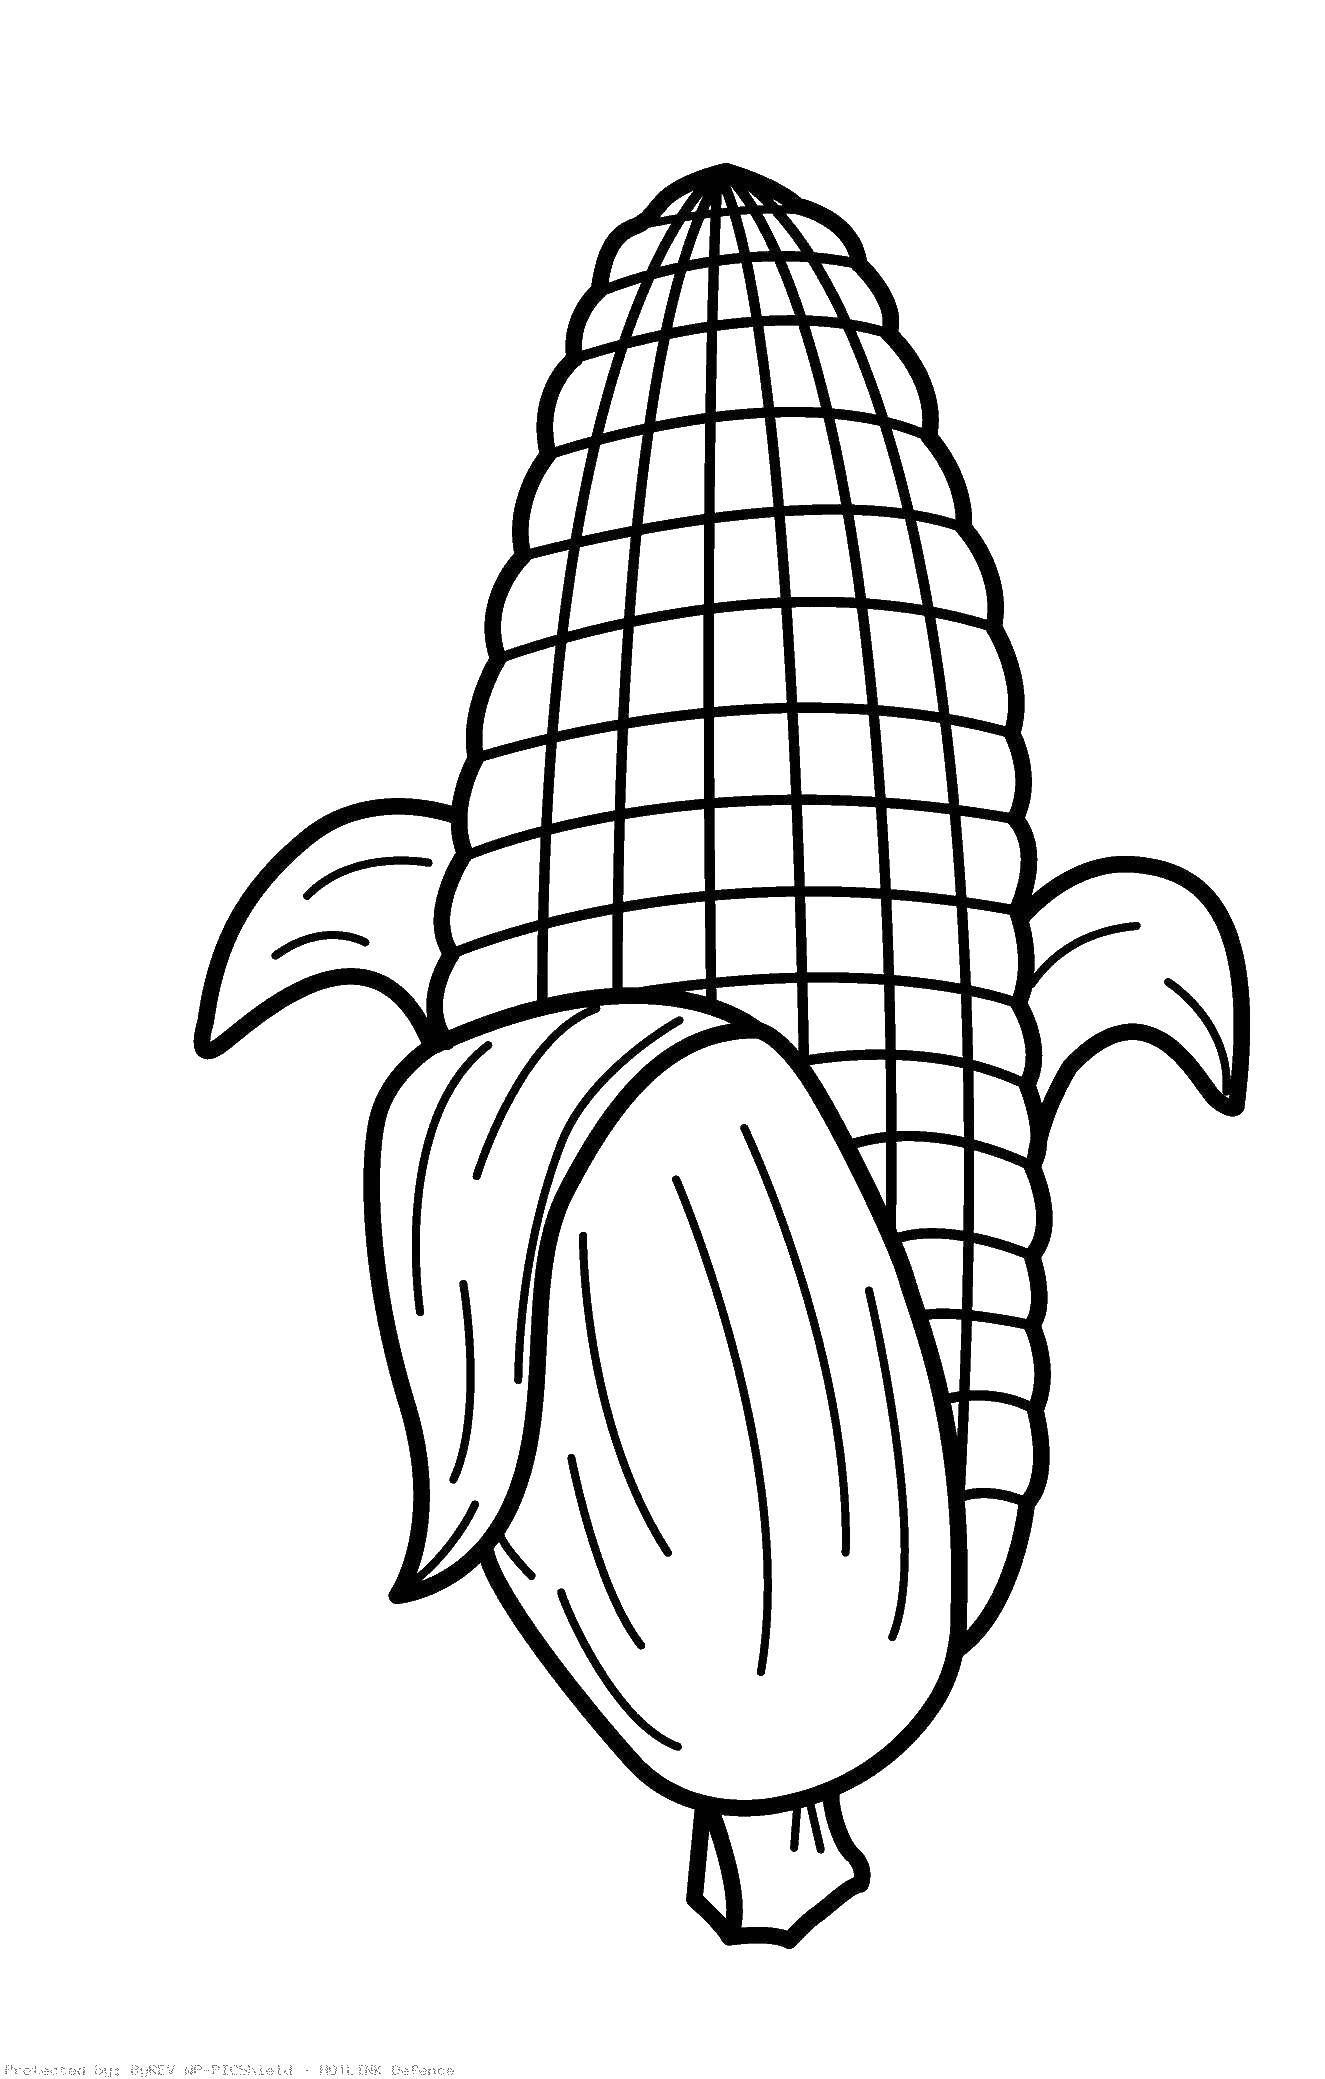 Coloring Corn. Category Vegetables. Tags:  vegetables, corn, food.